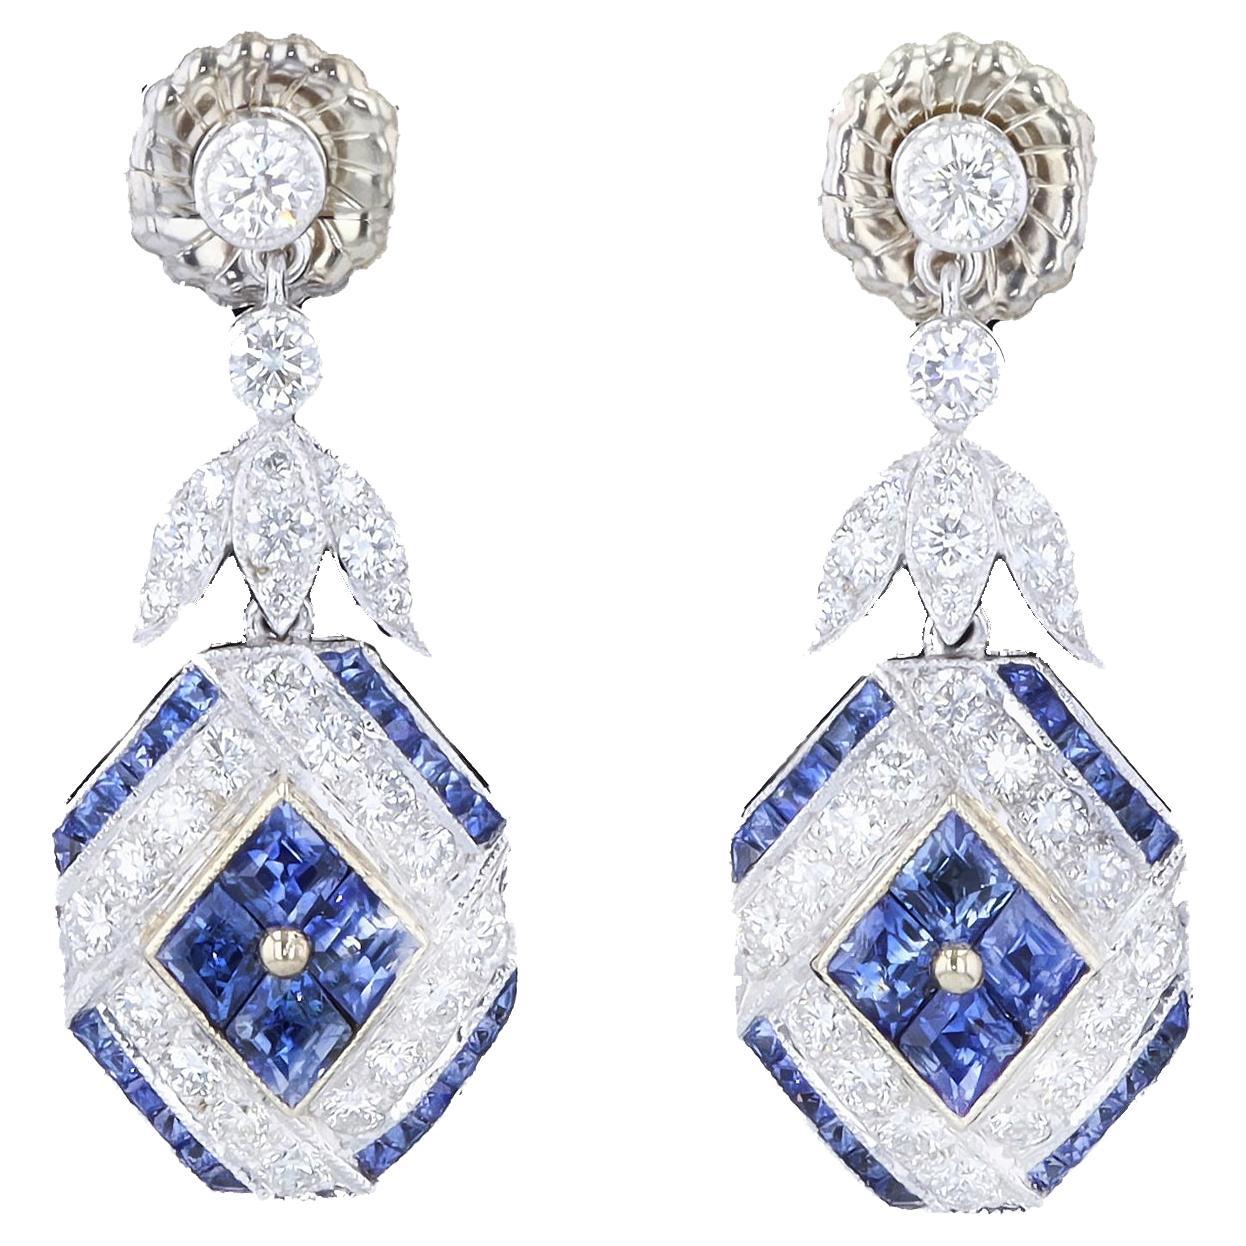 18K White and Yellow Gold Diamond Earrings with French Cut Sapphires For Sale